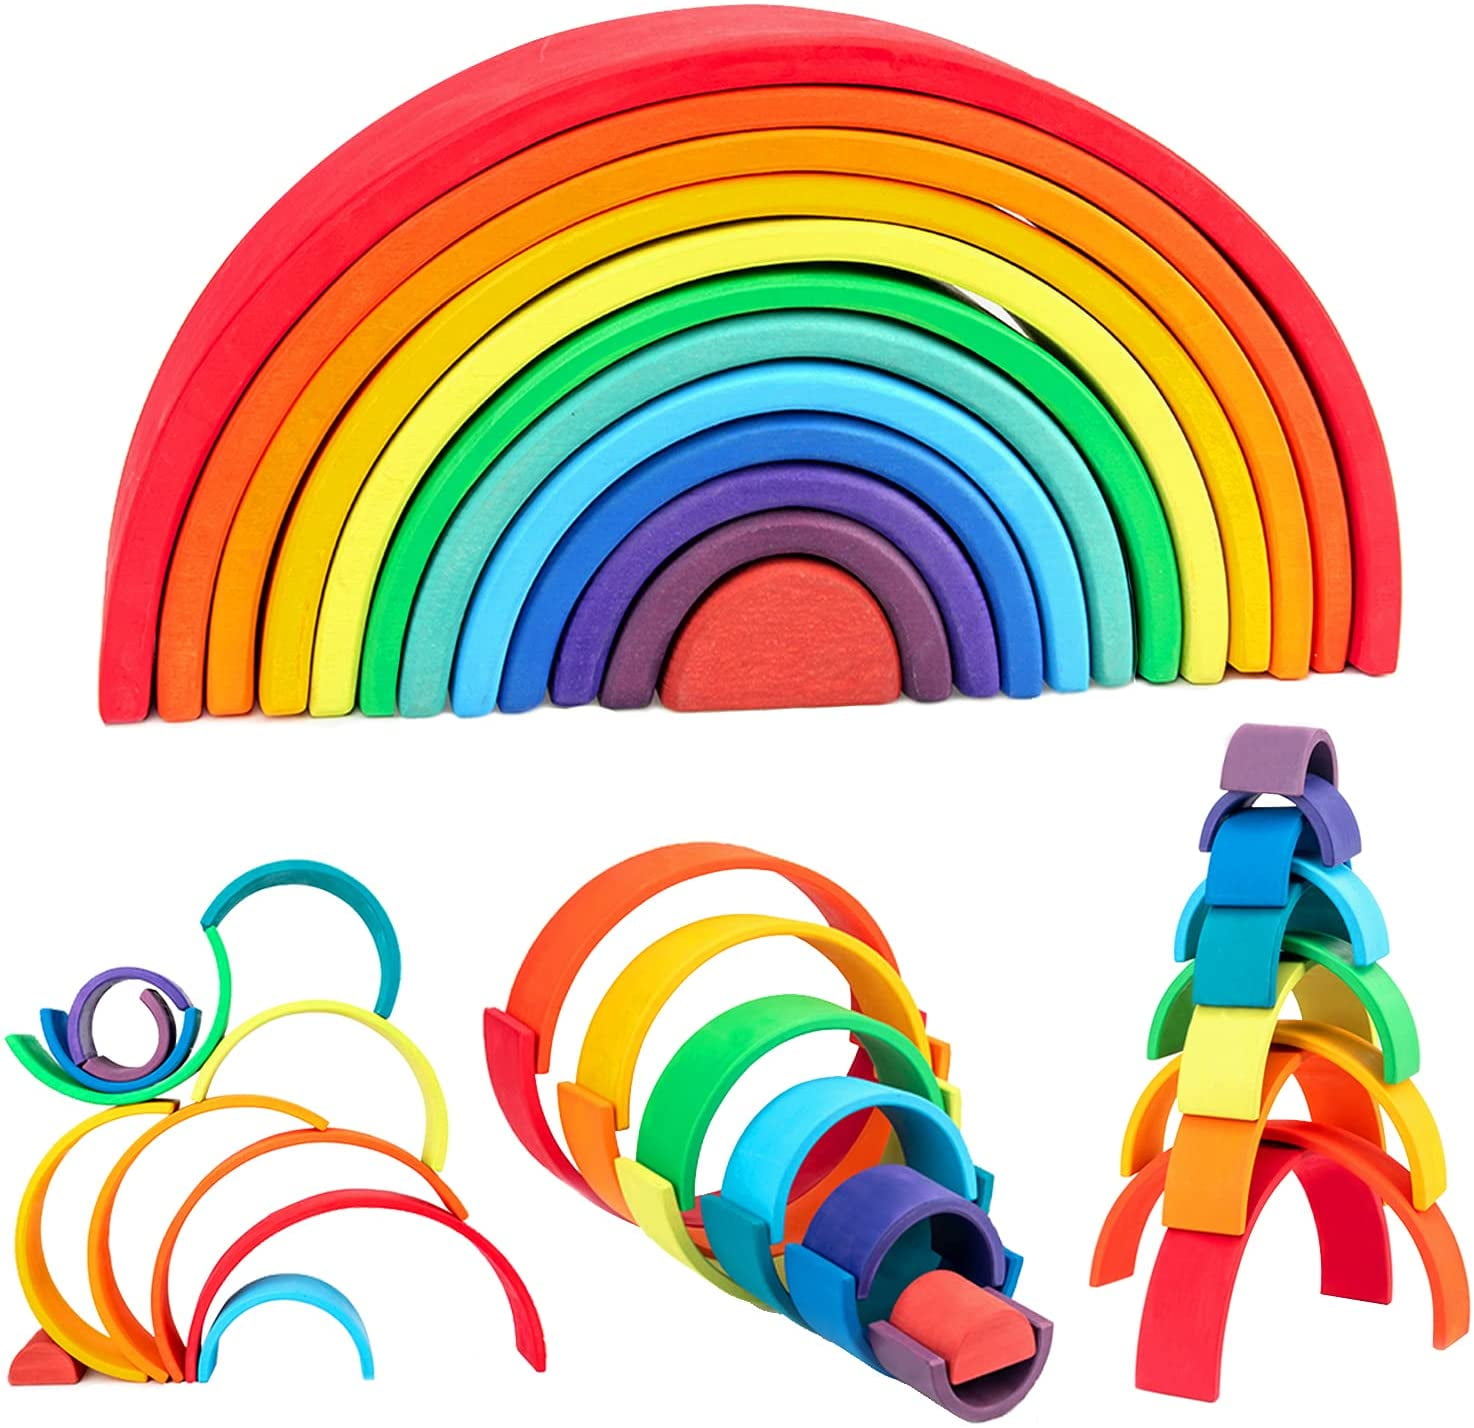 Kids/Baby Preschool 7 Colors Rainbow Stacking Arch Blocks Wooden Toy Gift 